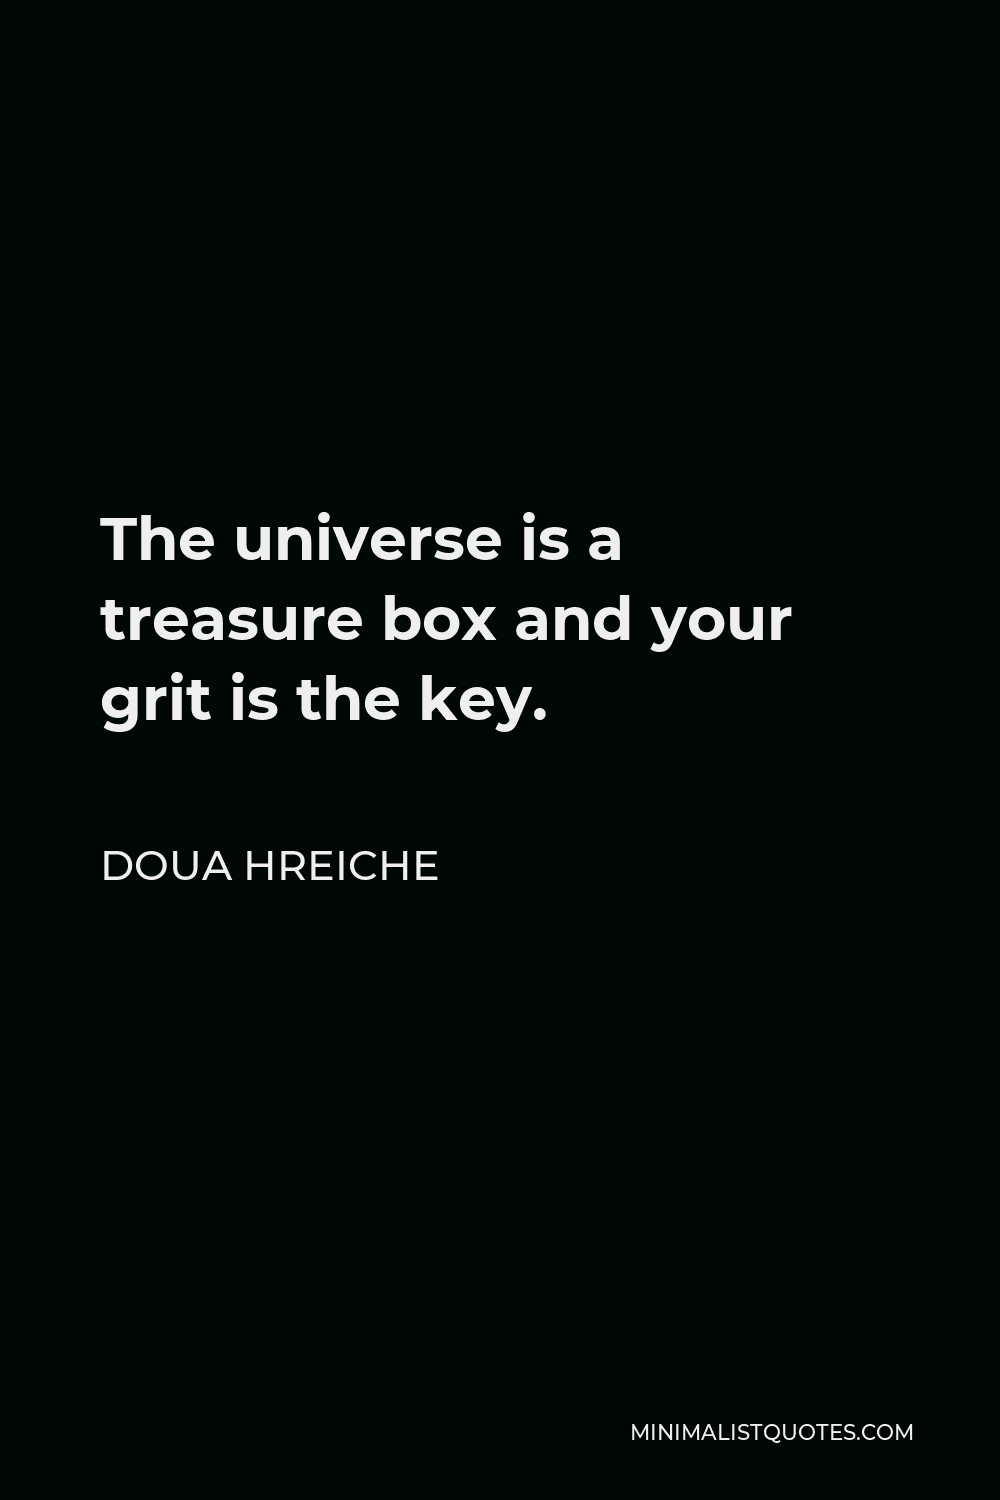 Doua Hreiche Quote - The universe is a treasure box and your grit is the key.